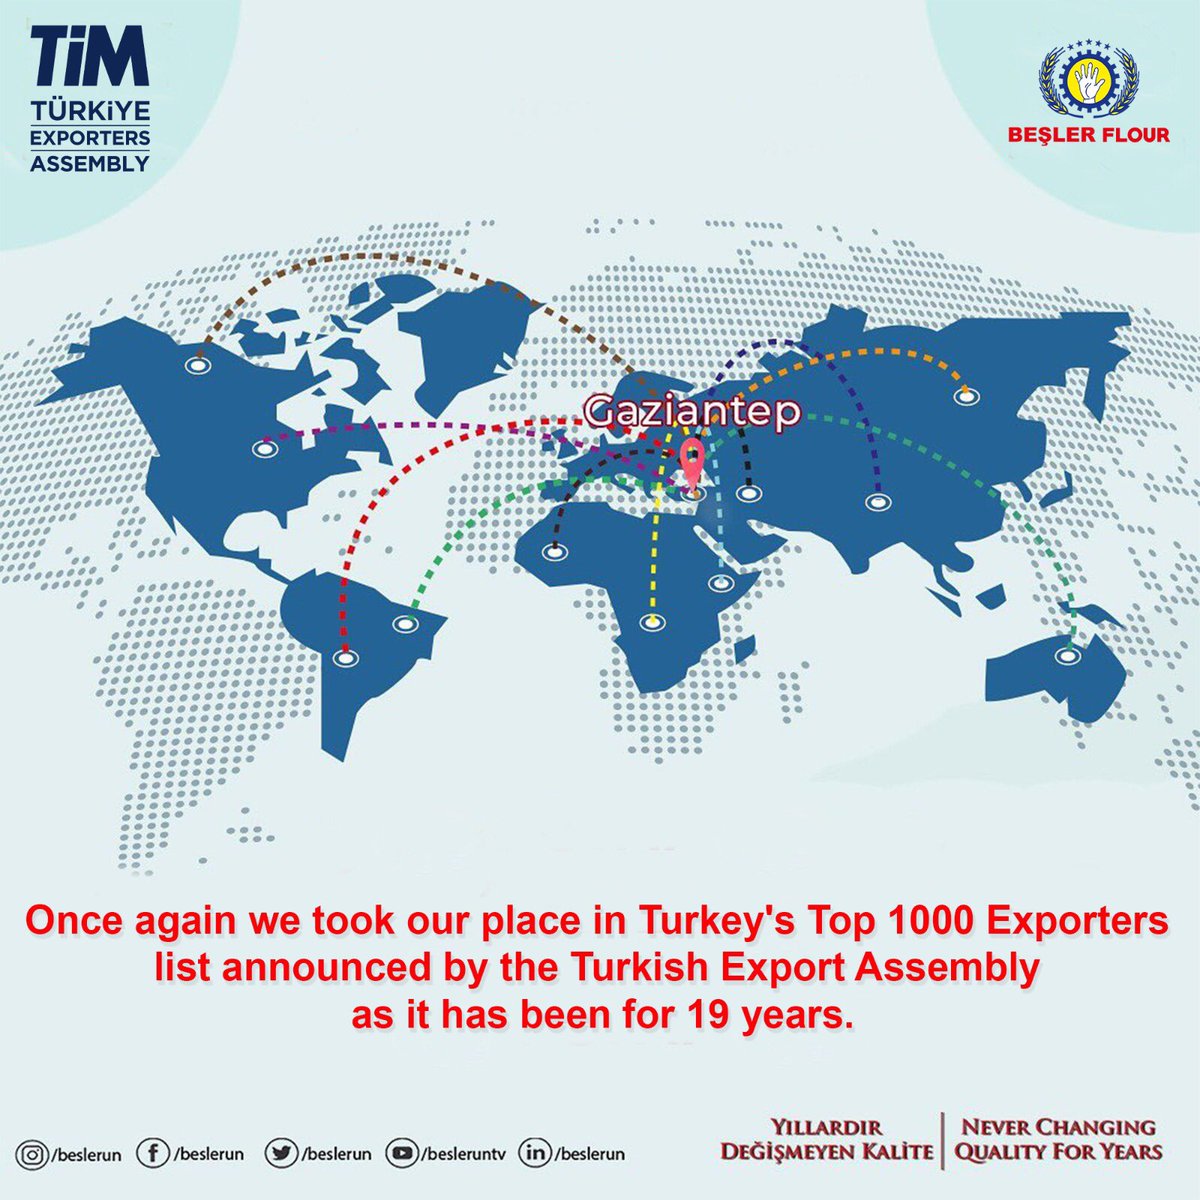 This year, we took our place in Turkey's Top 1000 Exporters list announced by the Turkish Export Assembly, as it has been for 19 years. We would like to thank all our staff who contributed to this success.

#beslerun #beslerun #beslergroup
 @beslergroup #TIM2022 #İlk1000İhracatçı